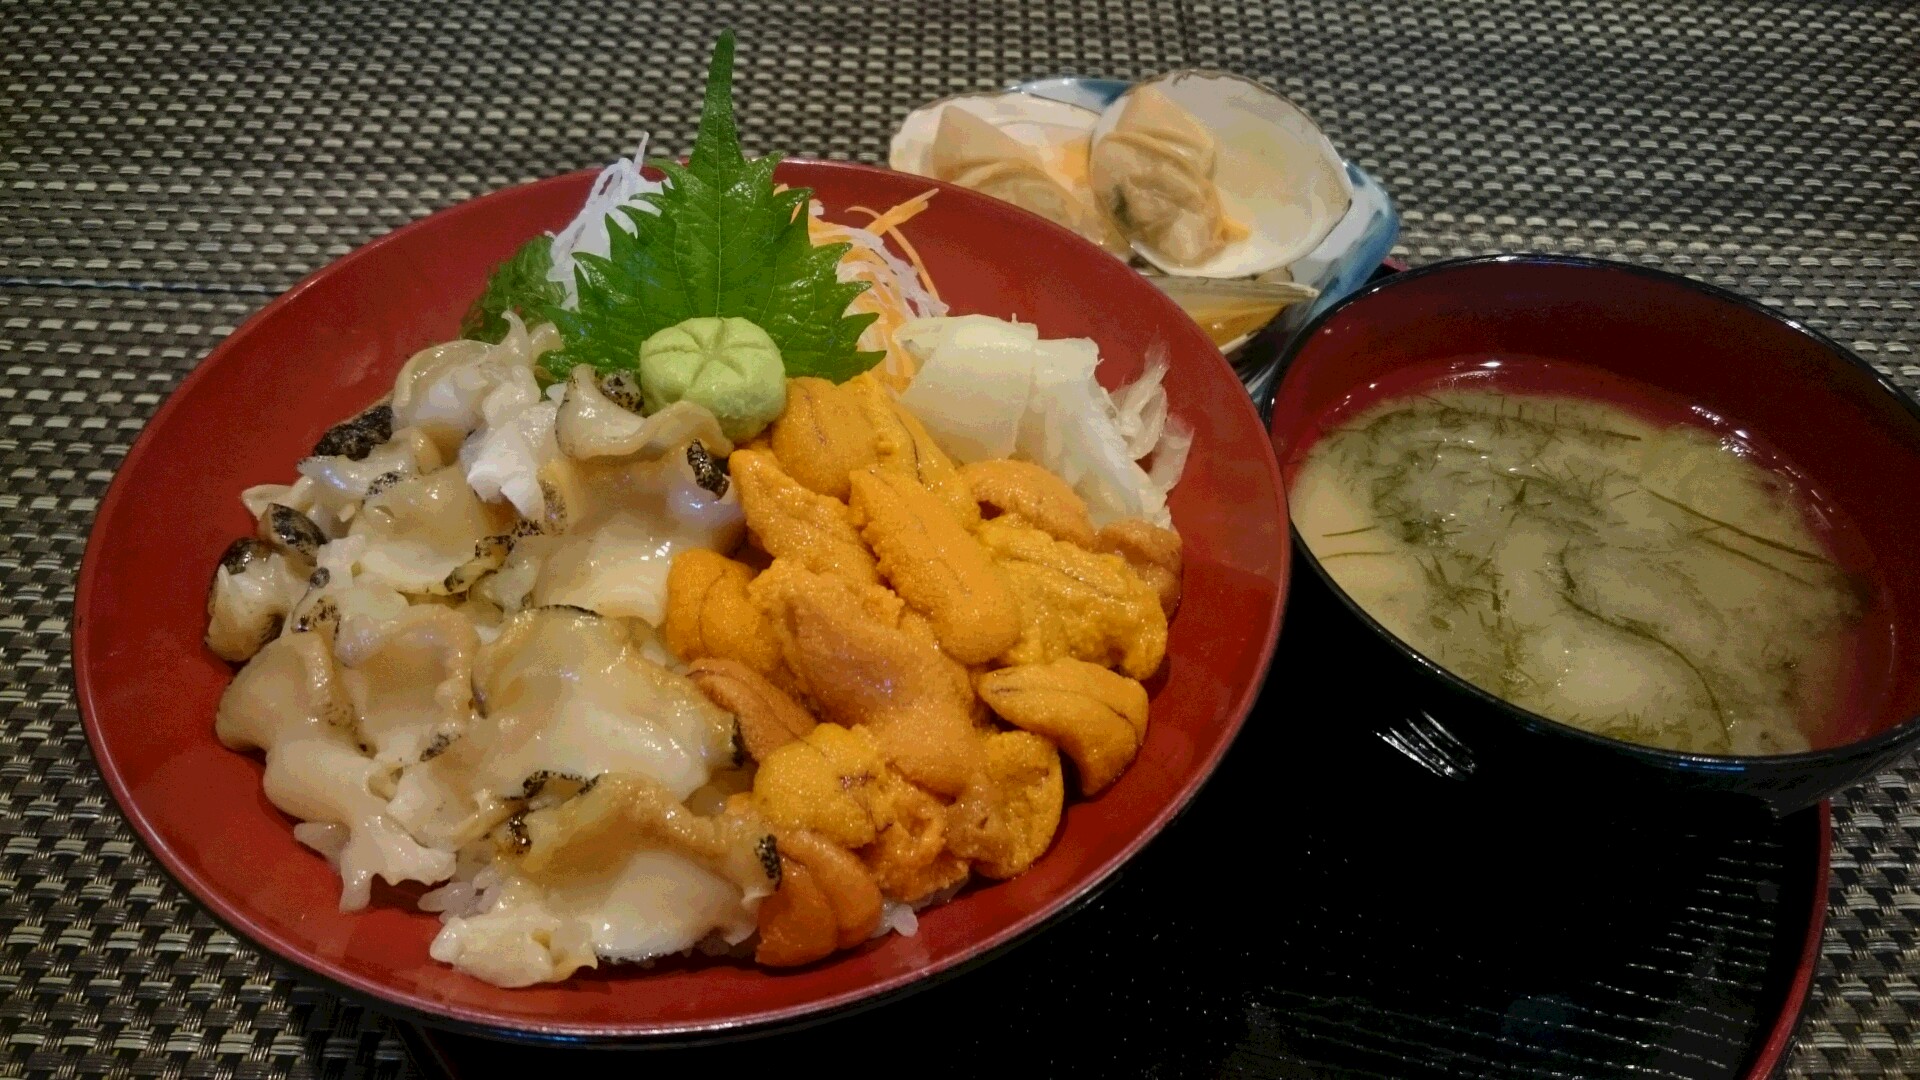 Enjoy Sea Urchins and a Spectacular Ocean View at Ominaeshi